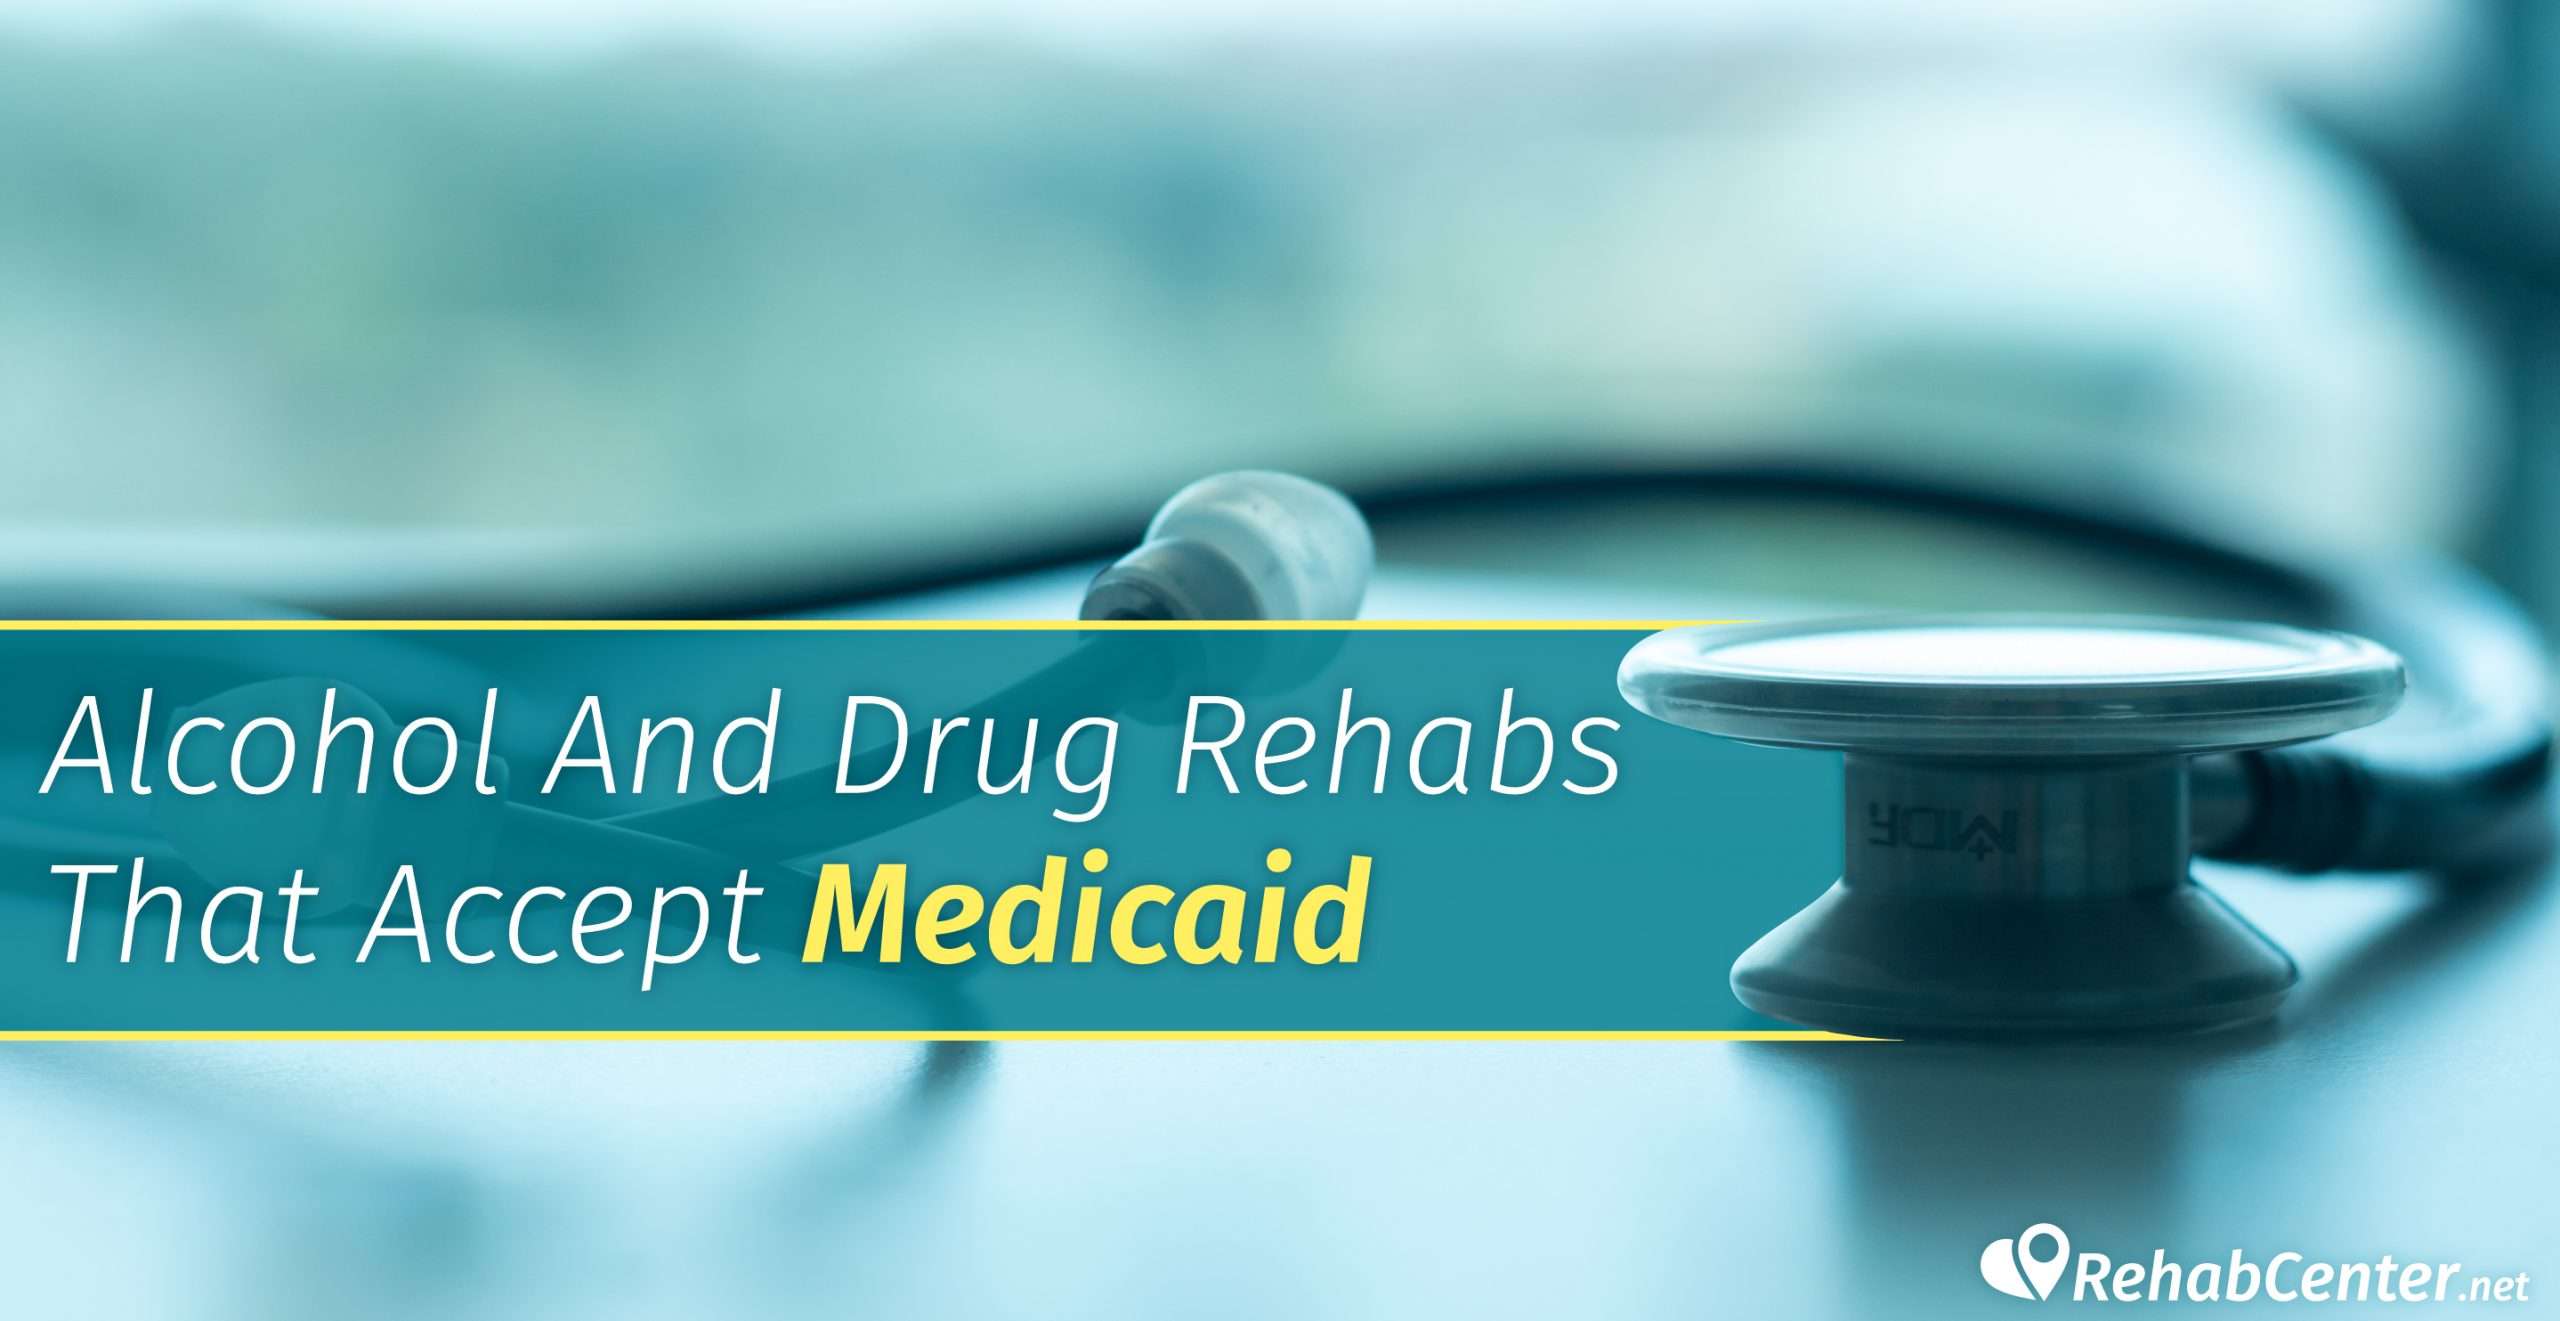 Alcohol And Drug Rehabs That Accept Medicaid